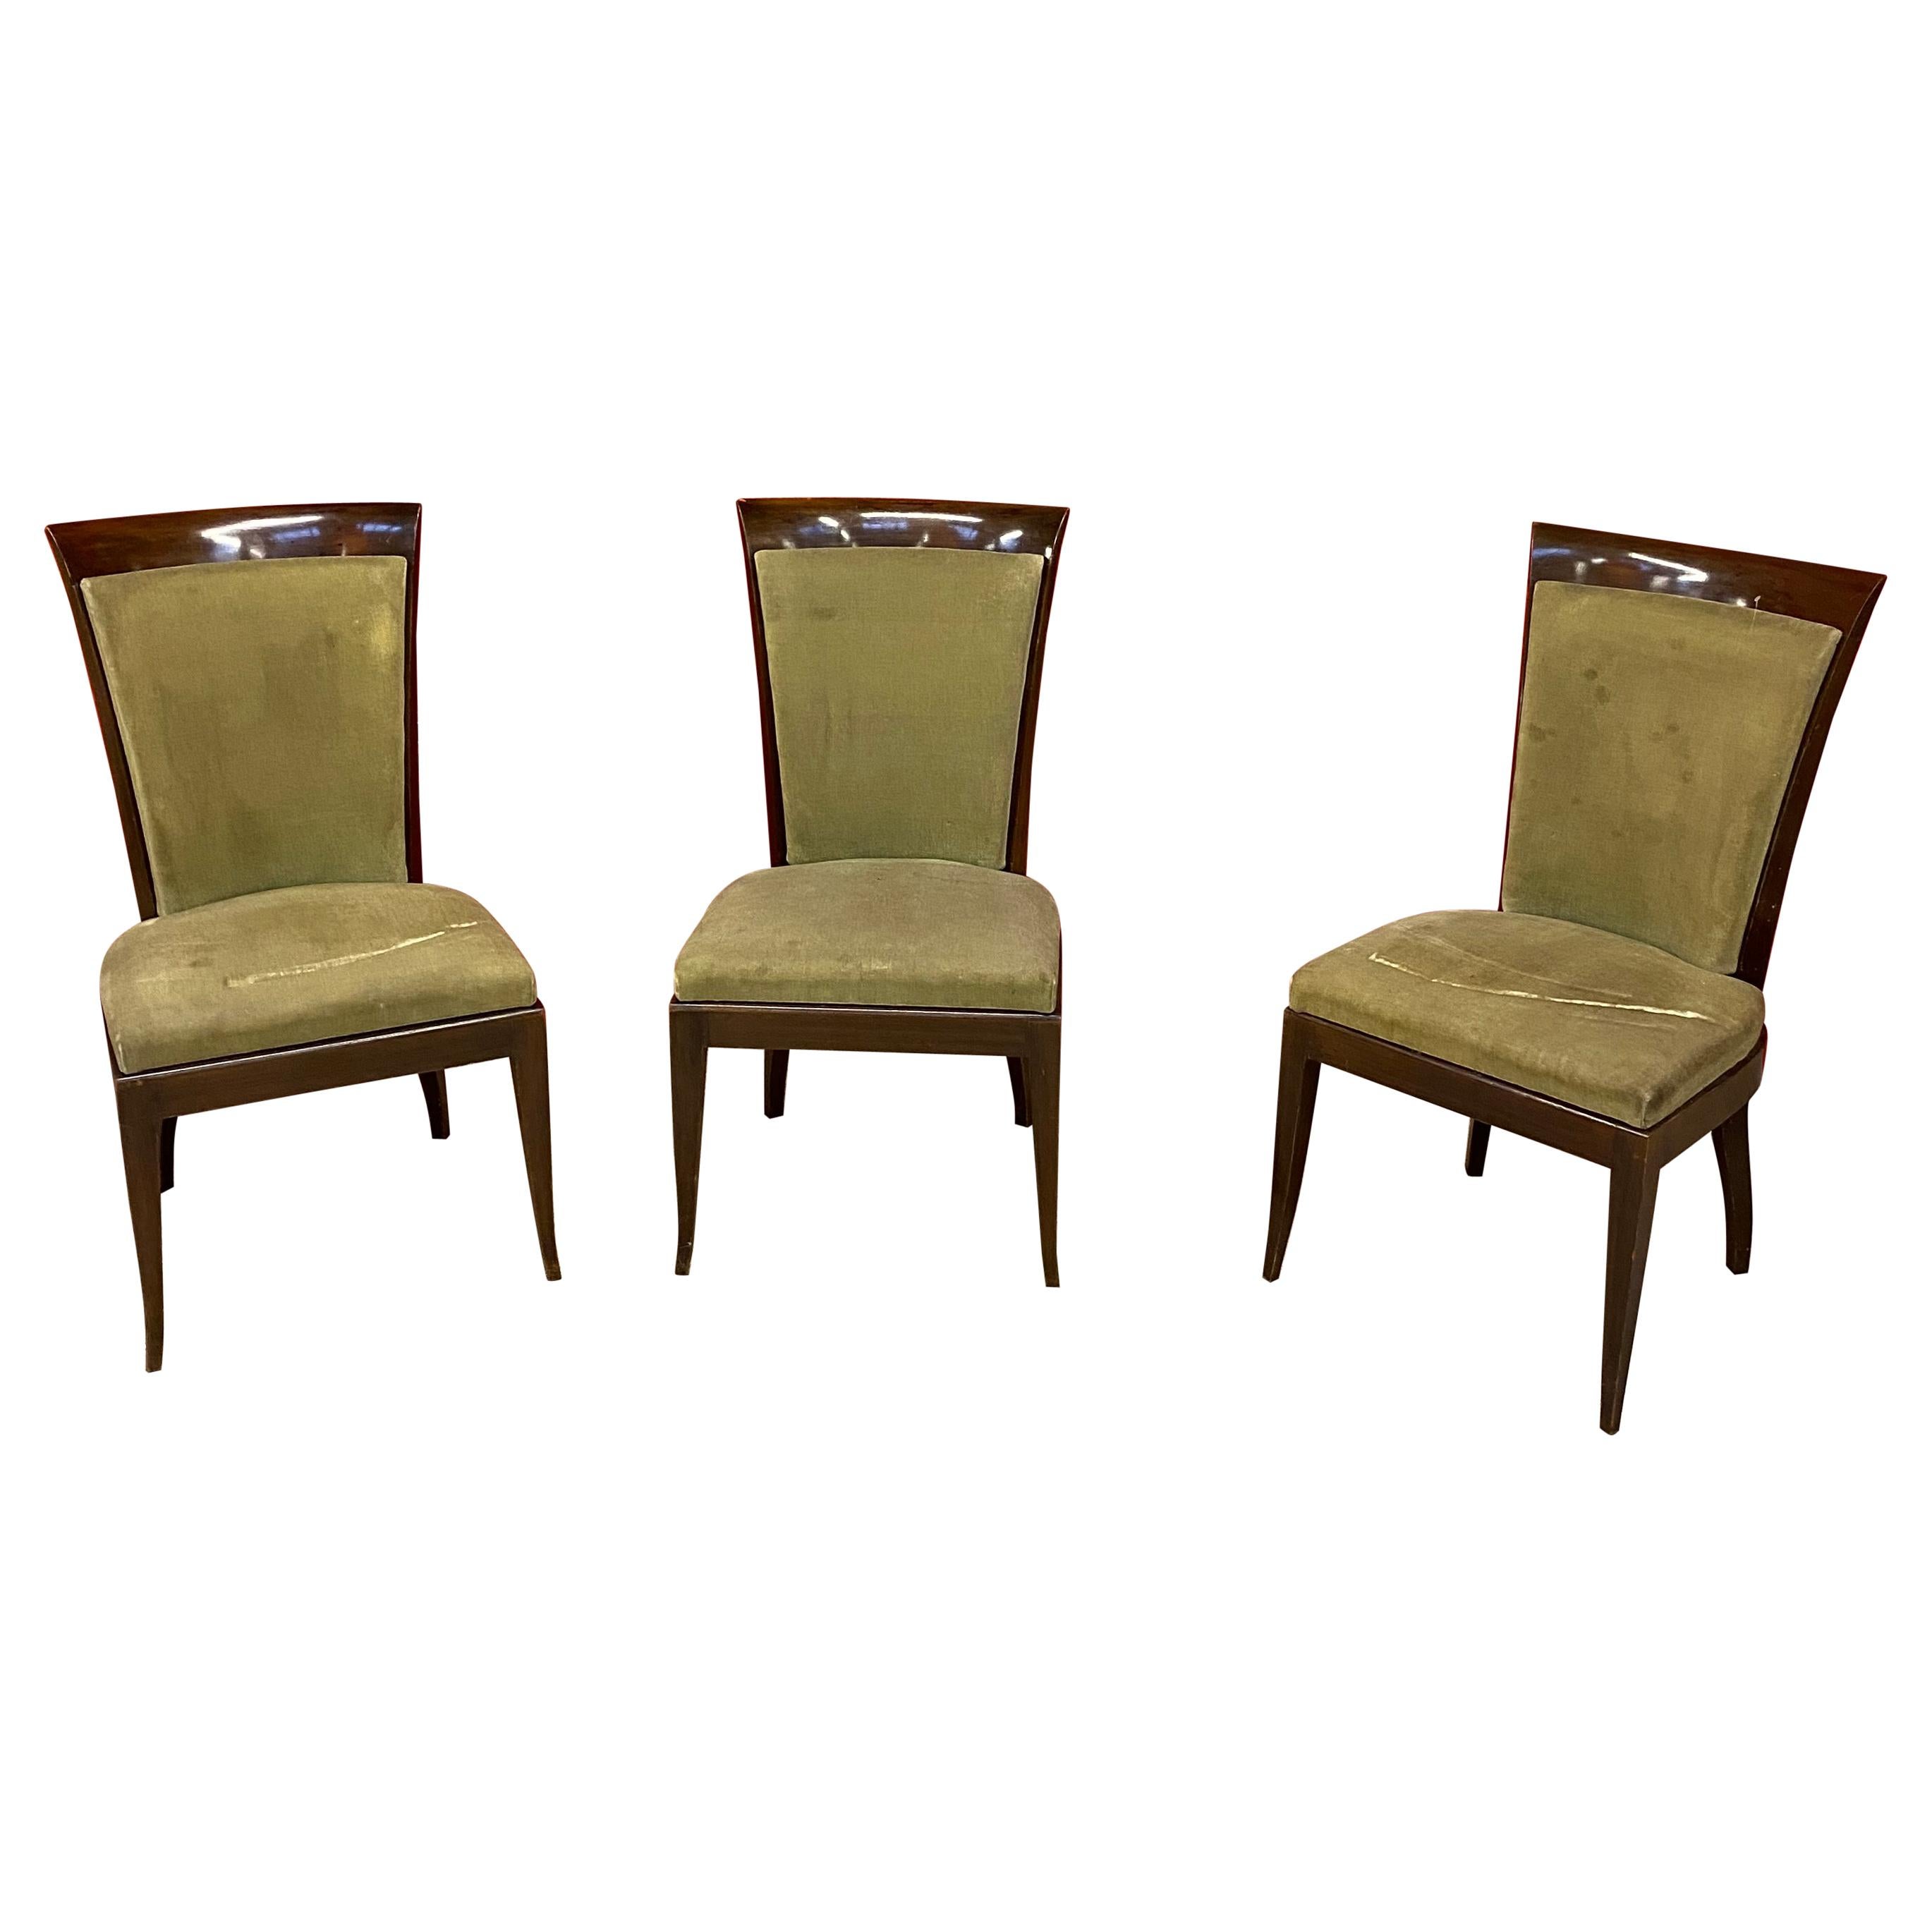 De Coene, 3 Large Art Deco Chairs in Solid Mahogany and Velvet, circa 1930